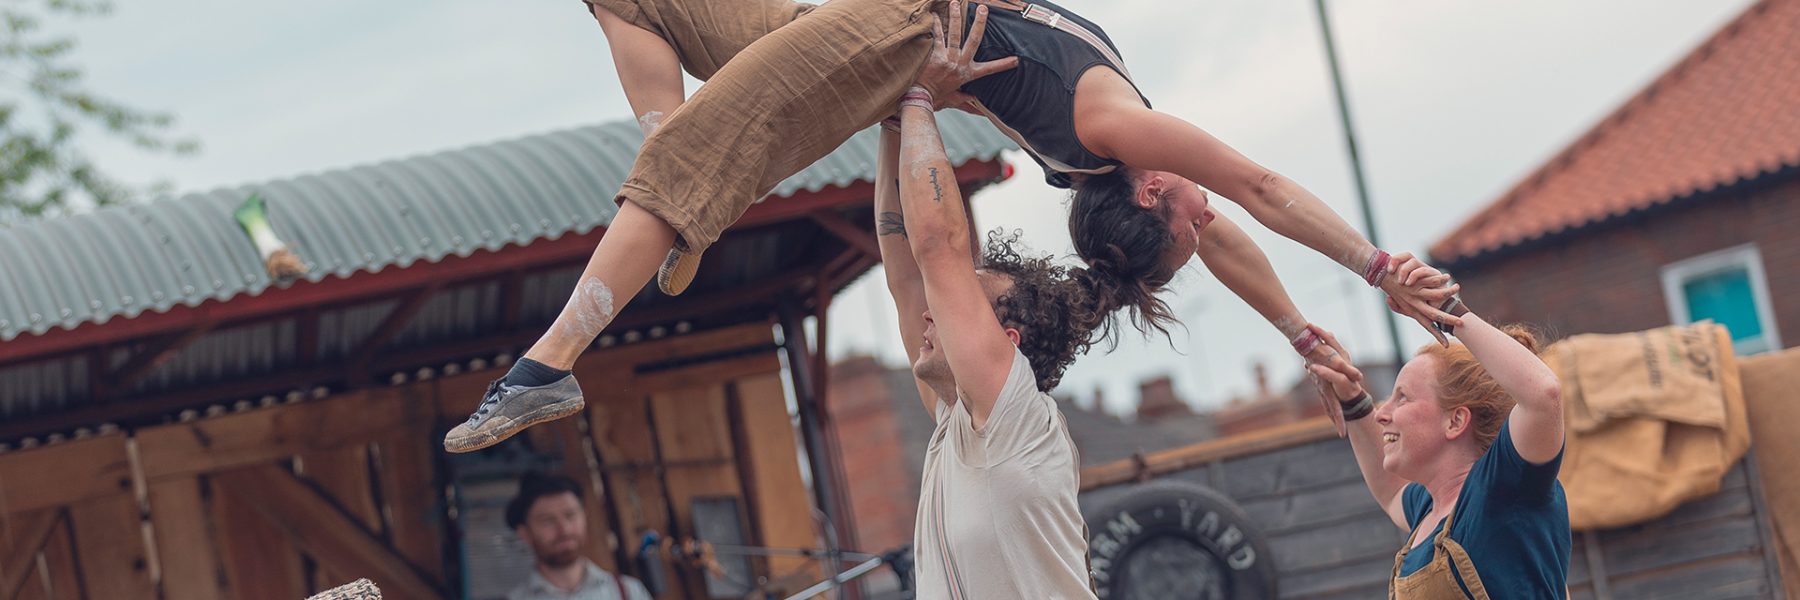 'Farmyard Circus' at the Revive Festival performing group acrobatics, juggling, theatre, and live music.